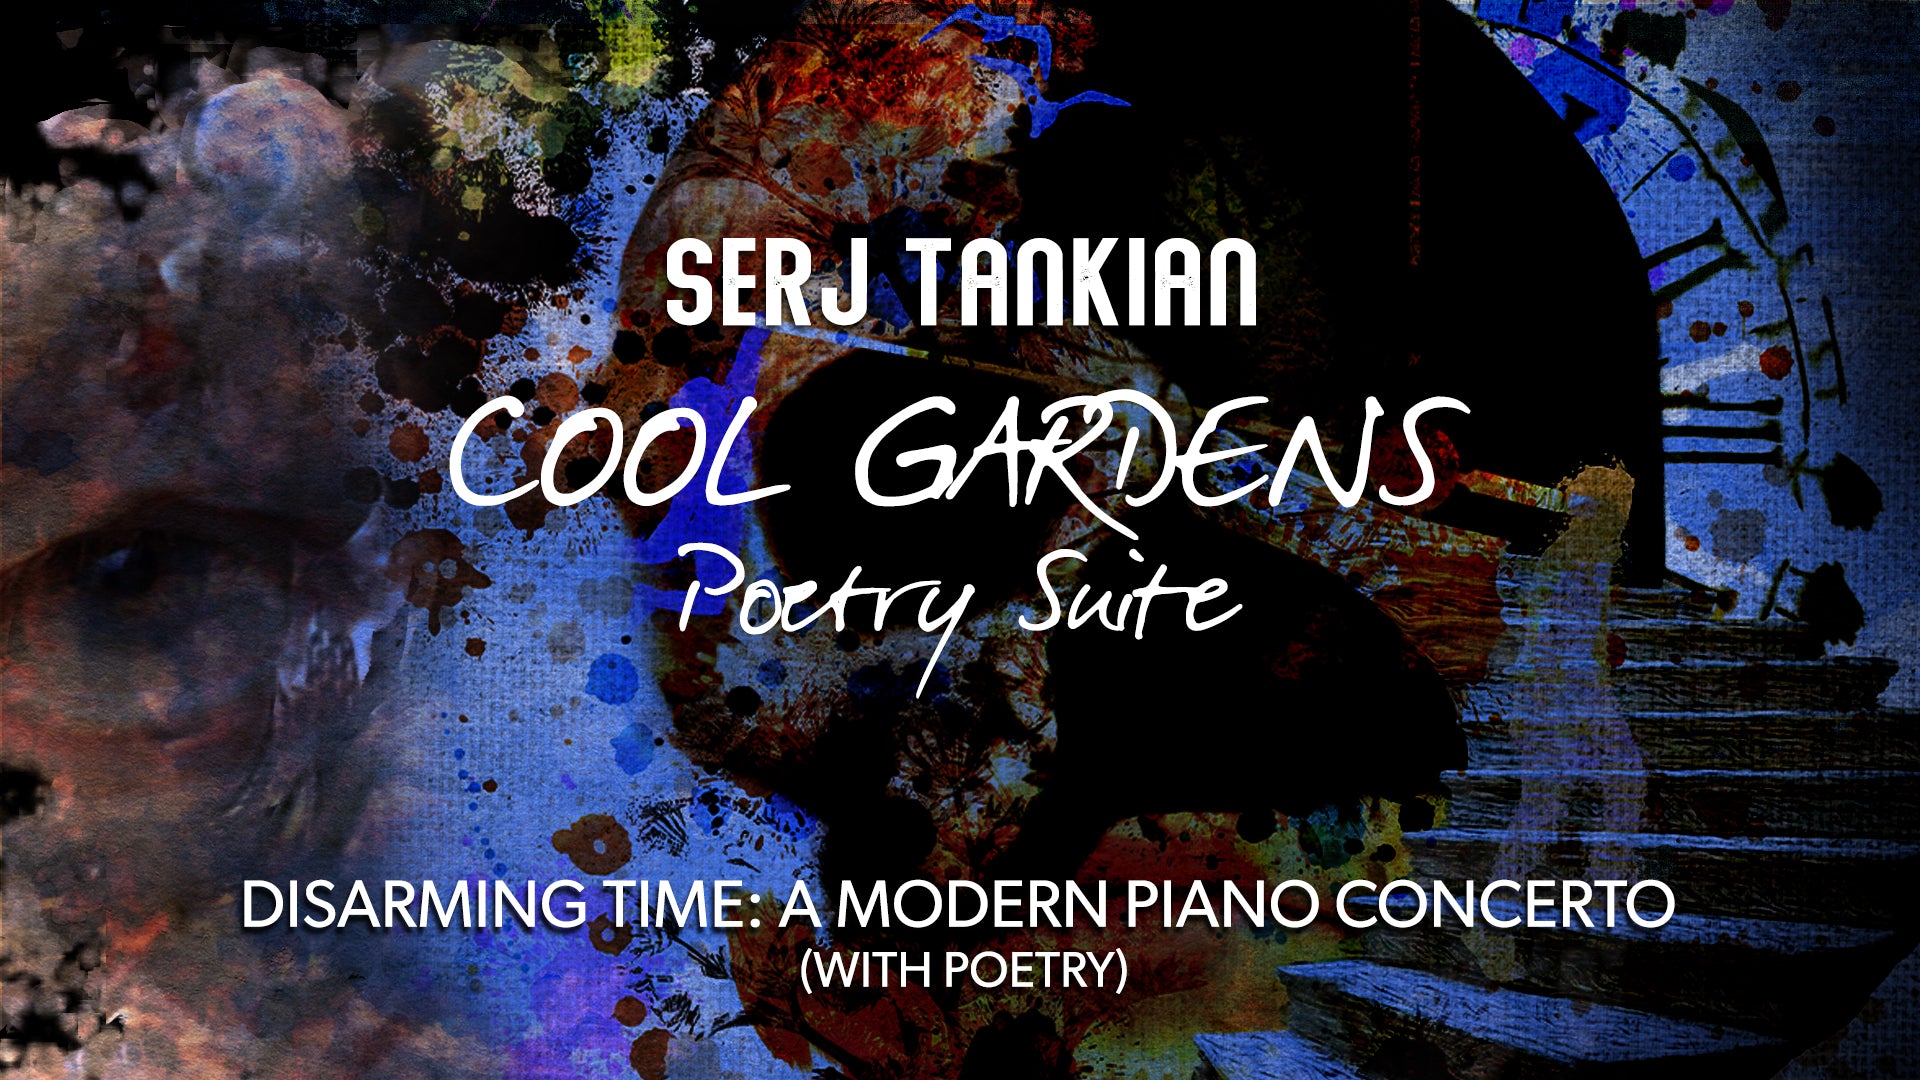 System of a Down’s Serj Tankian Pairs His Poetry With a Piano Concerto on ‘Disarming Time’